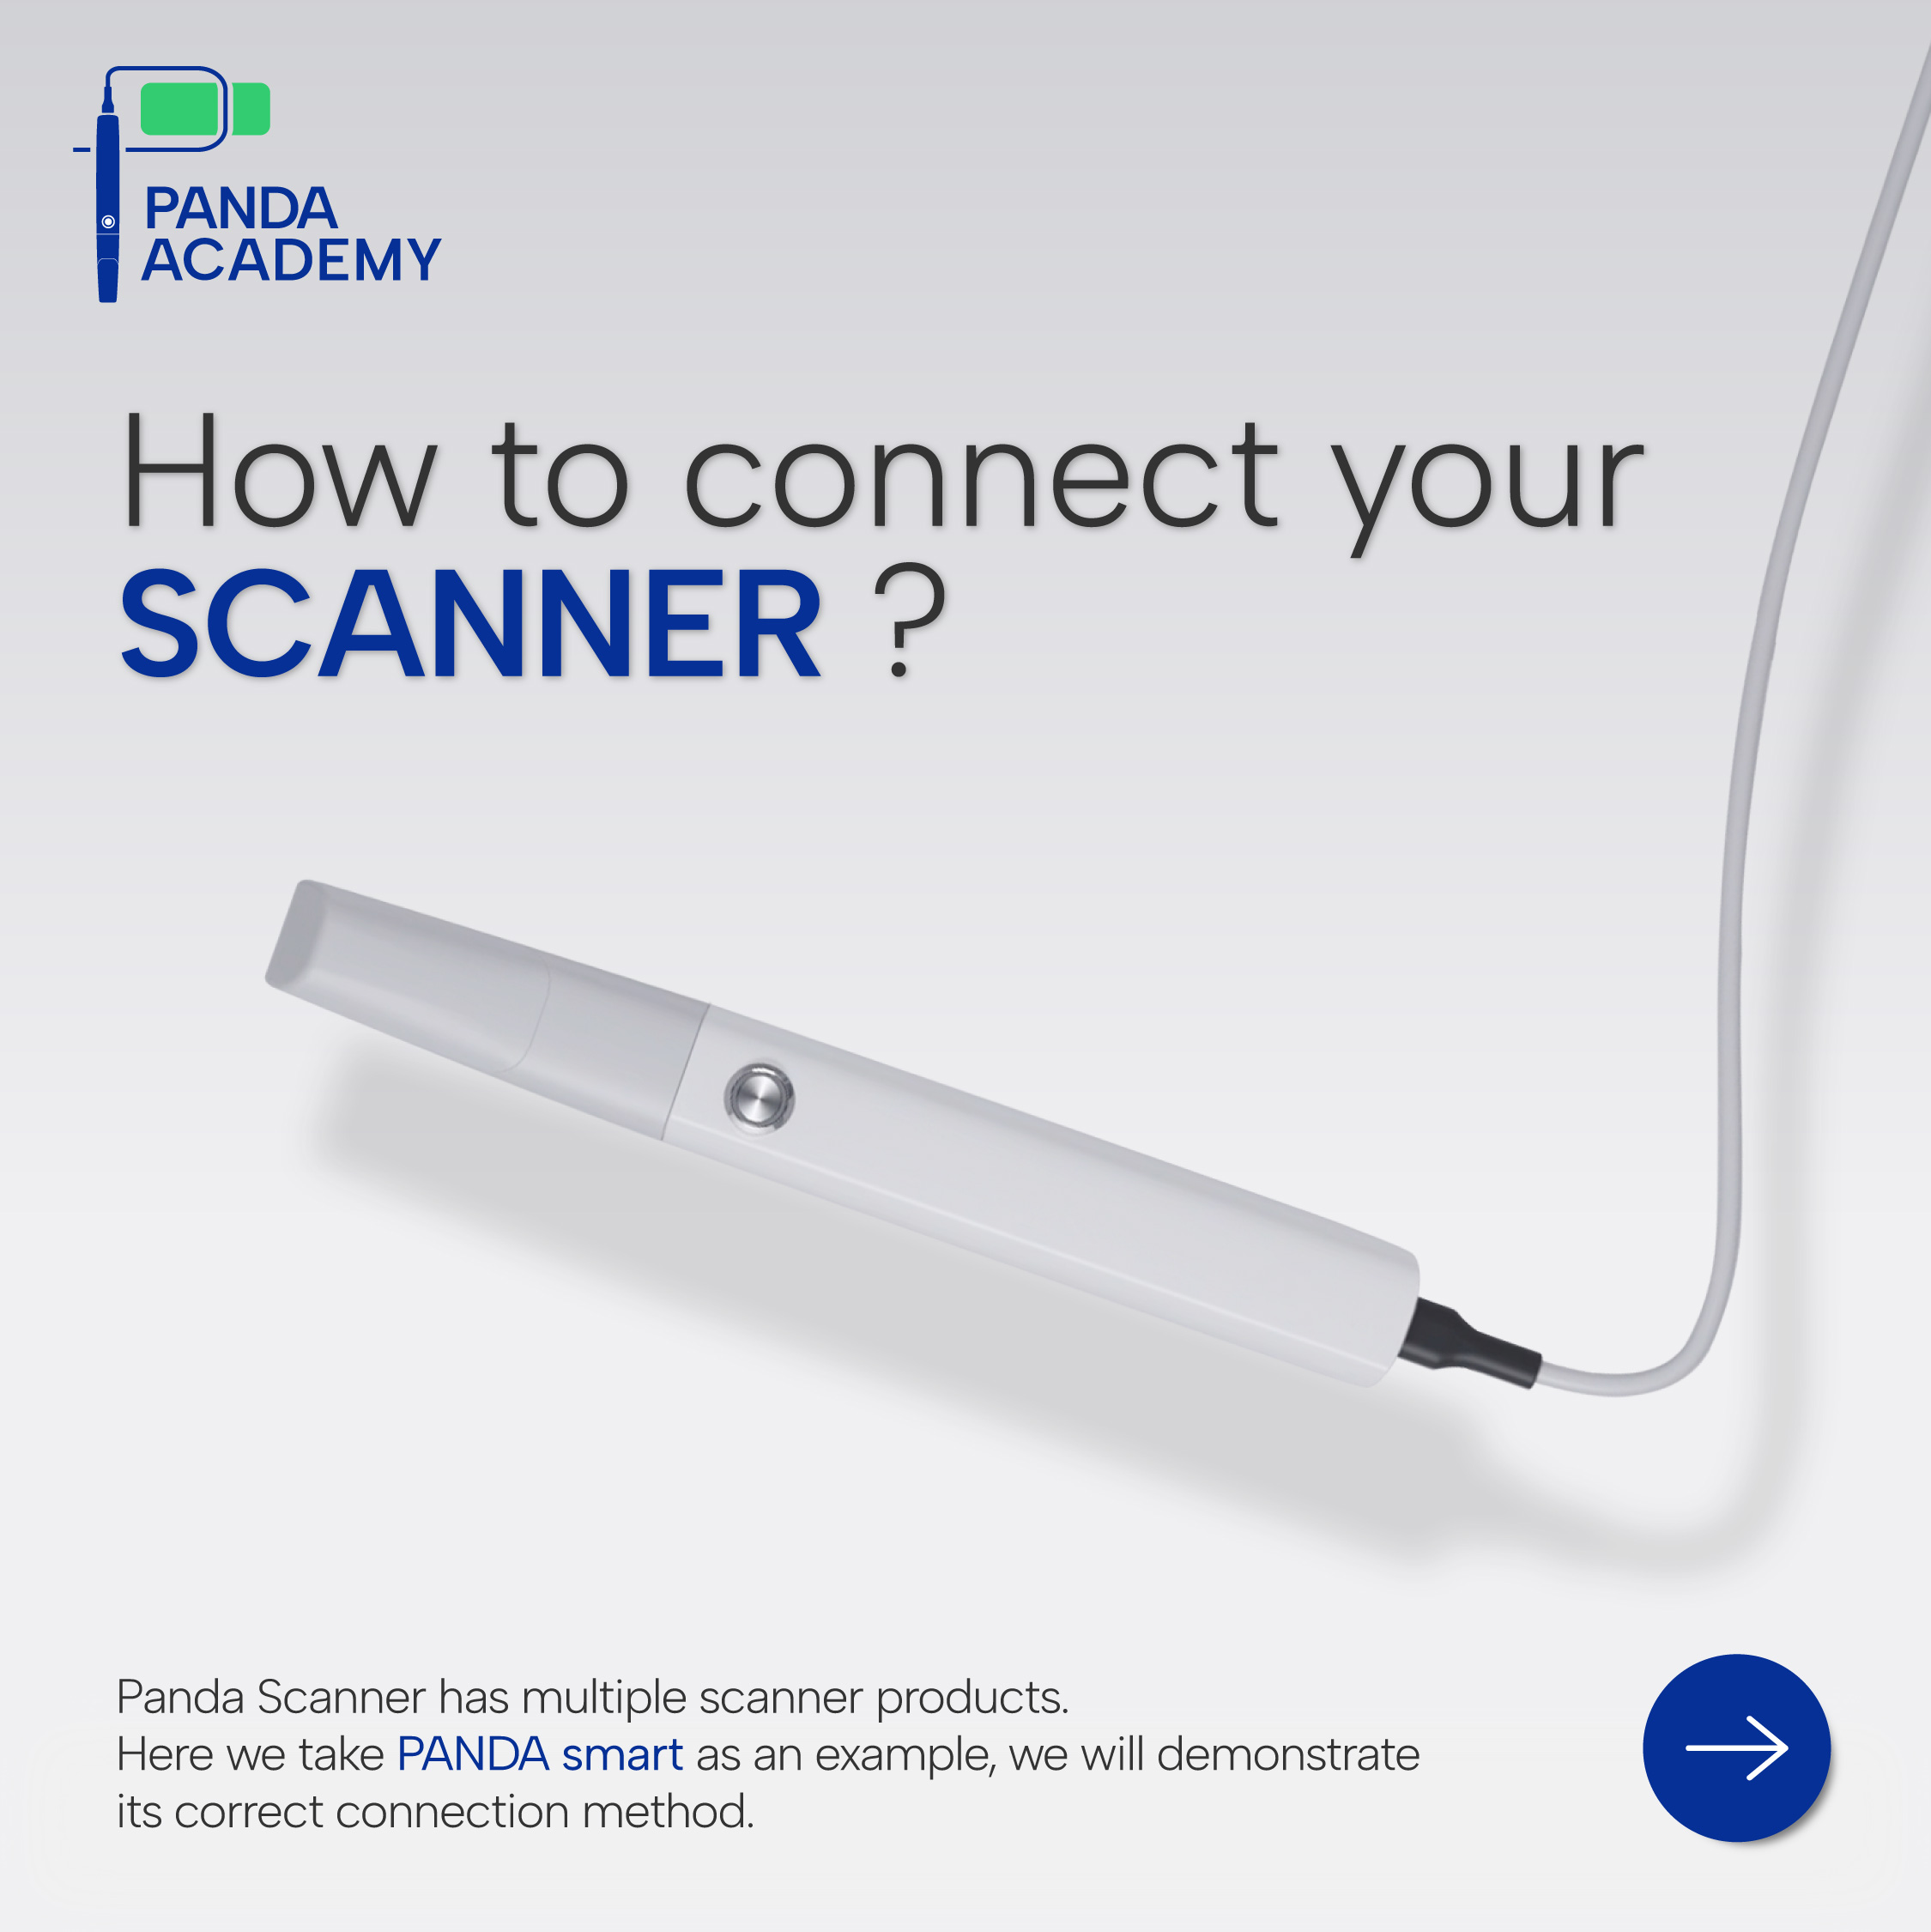 PANDA ACADEMY: How to Connect Your Scanner?